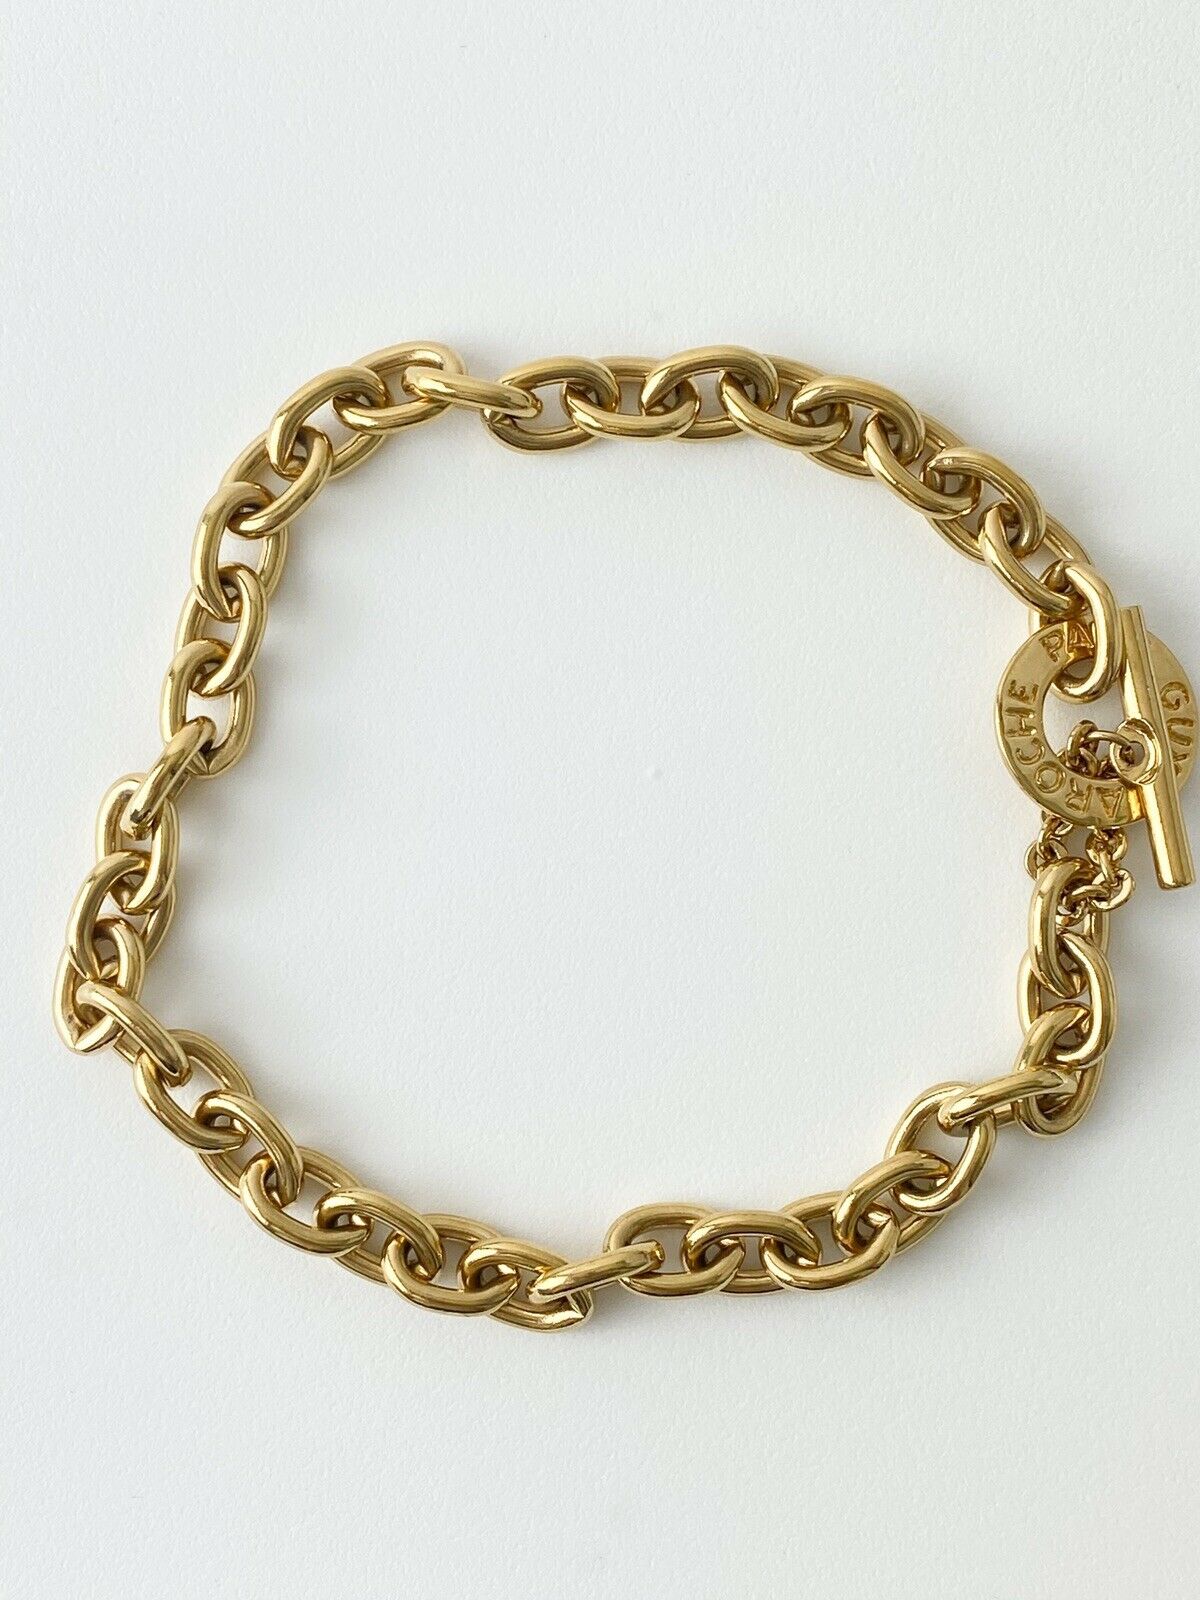 【SOLD OUT】Guy Laroche Gold Tone Bold Chain Choker Necklace Vintage